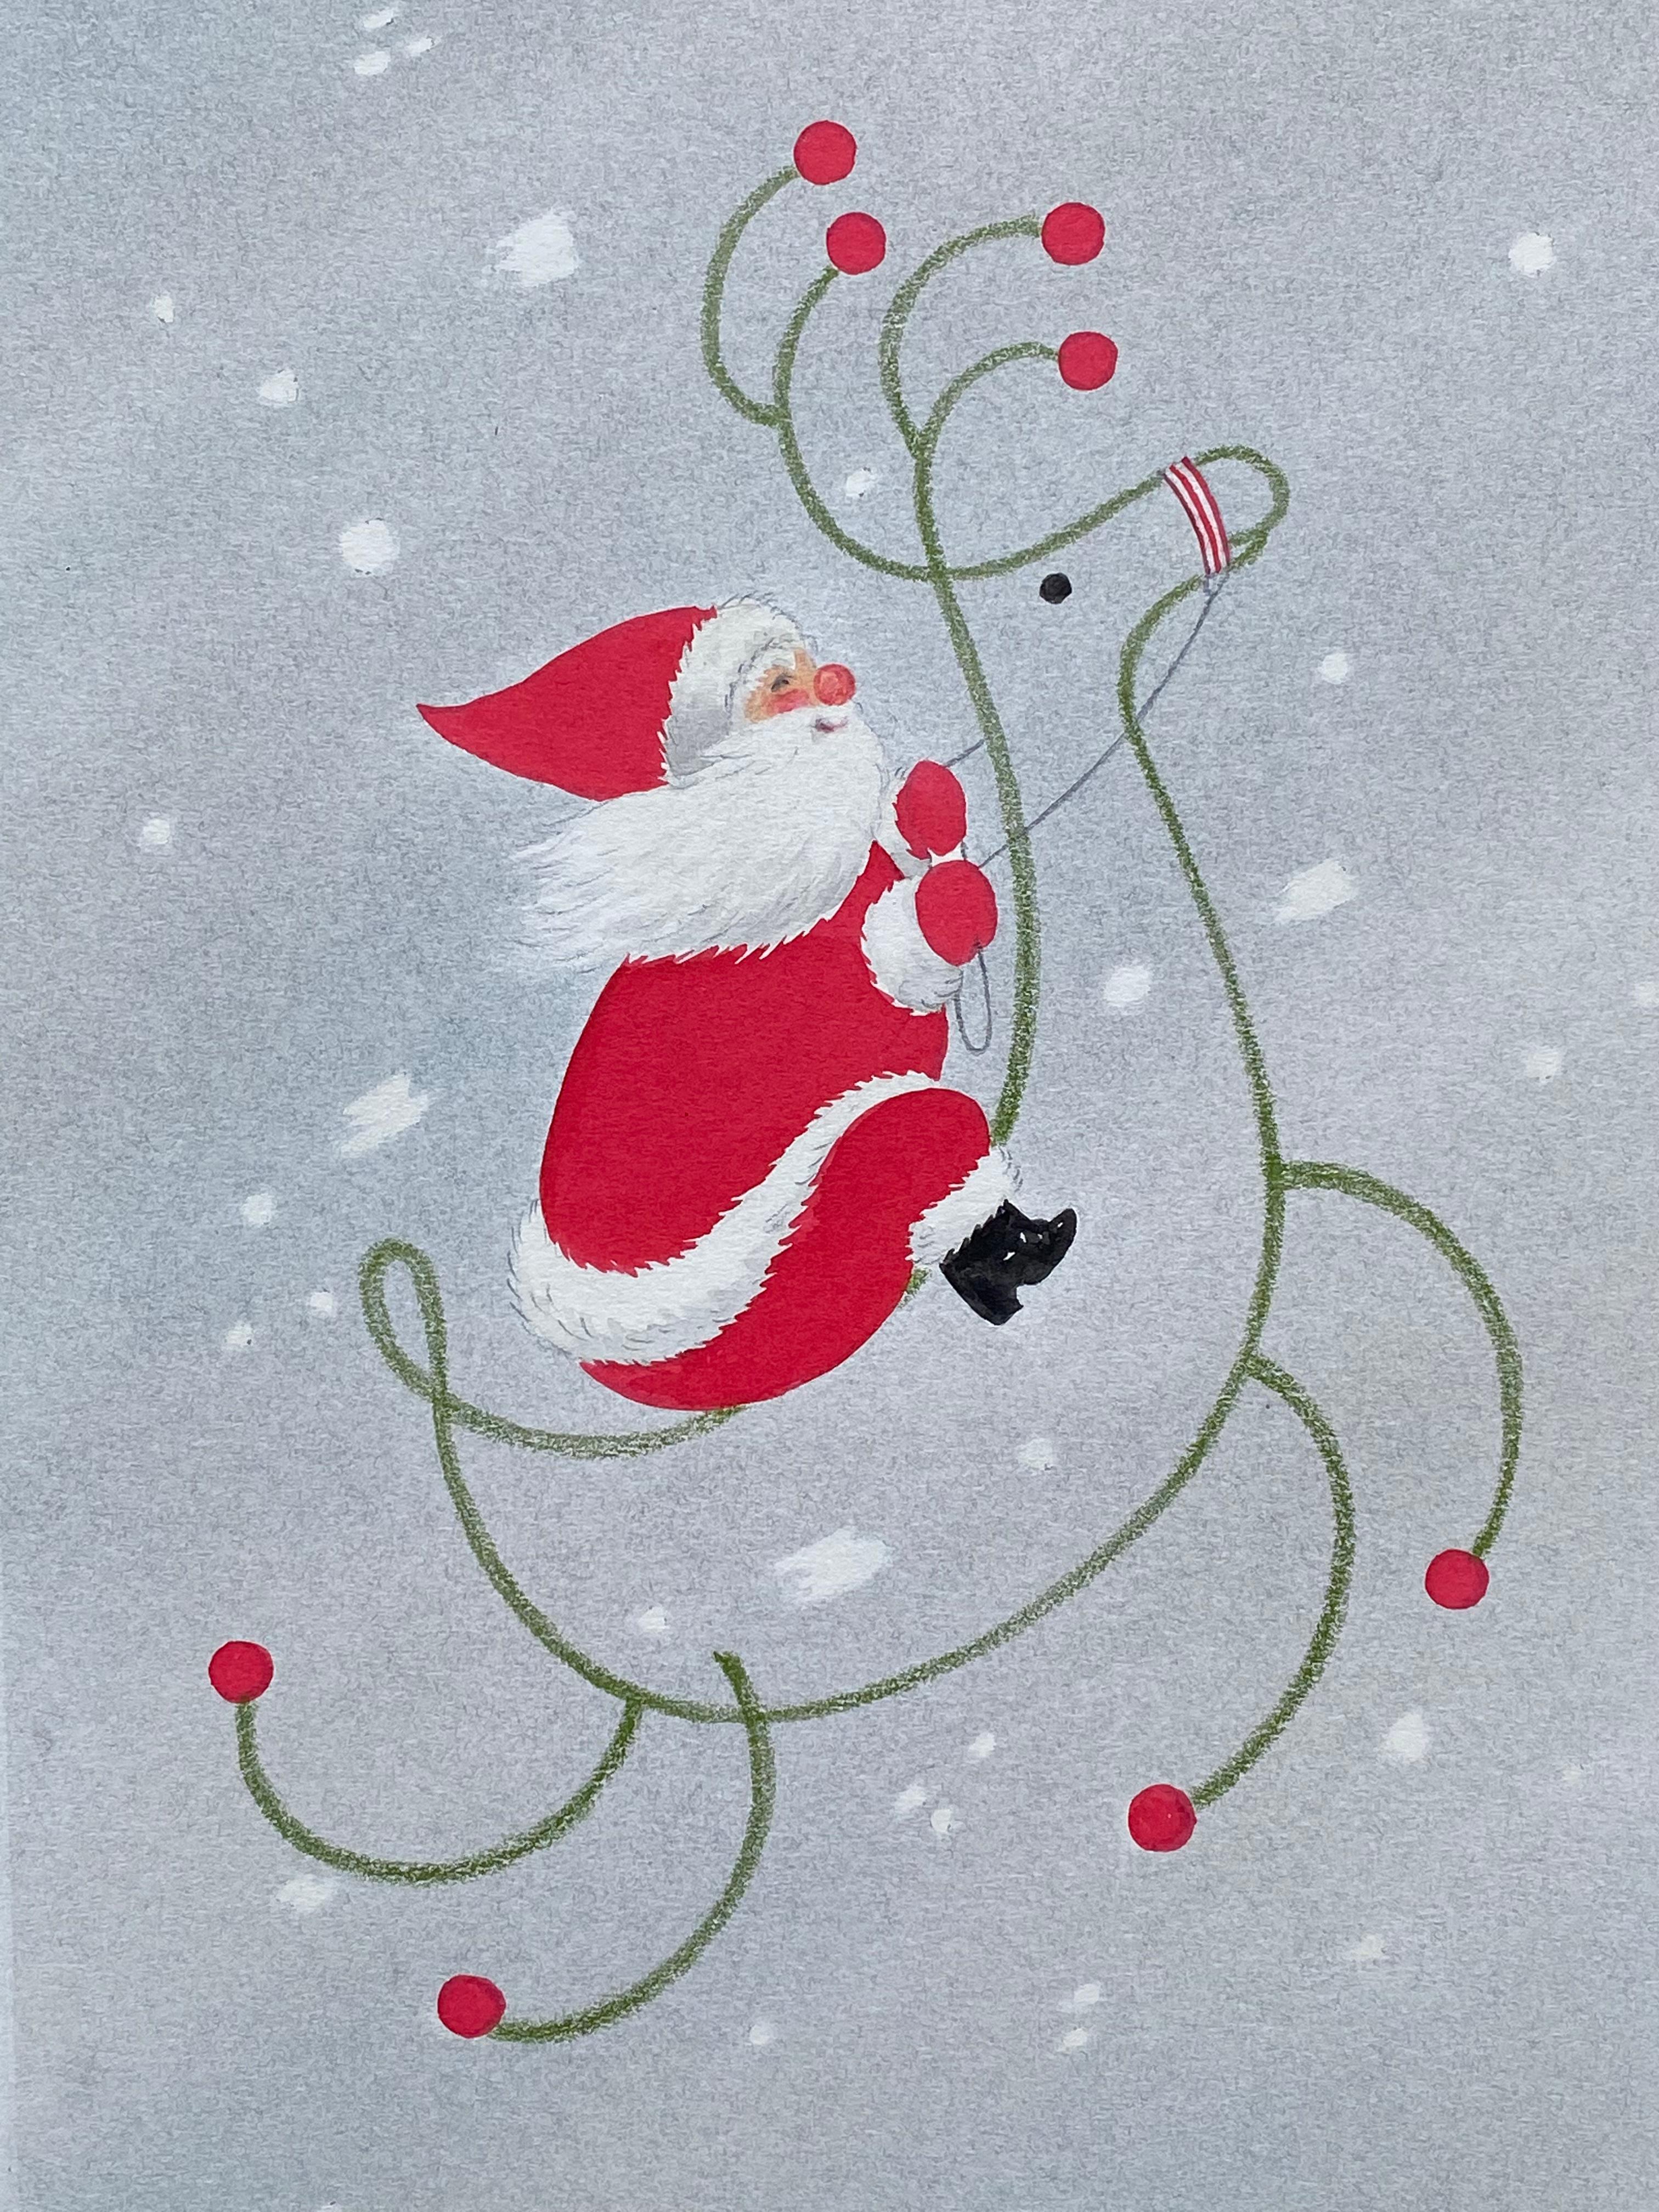 “Santa on his Reindeer” - Other Art Style Art by Unknown